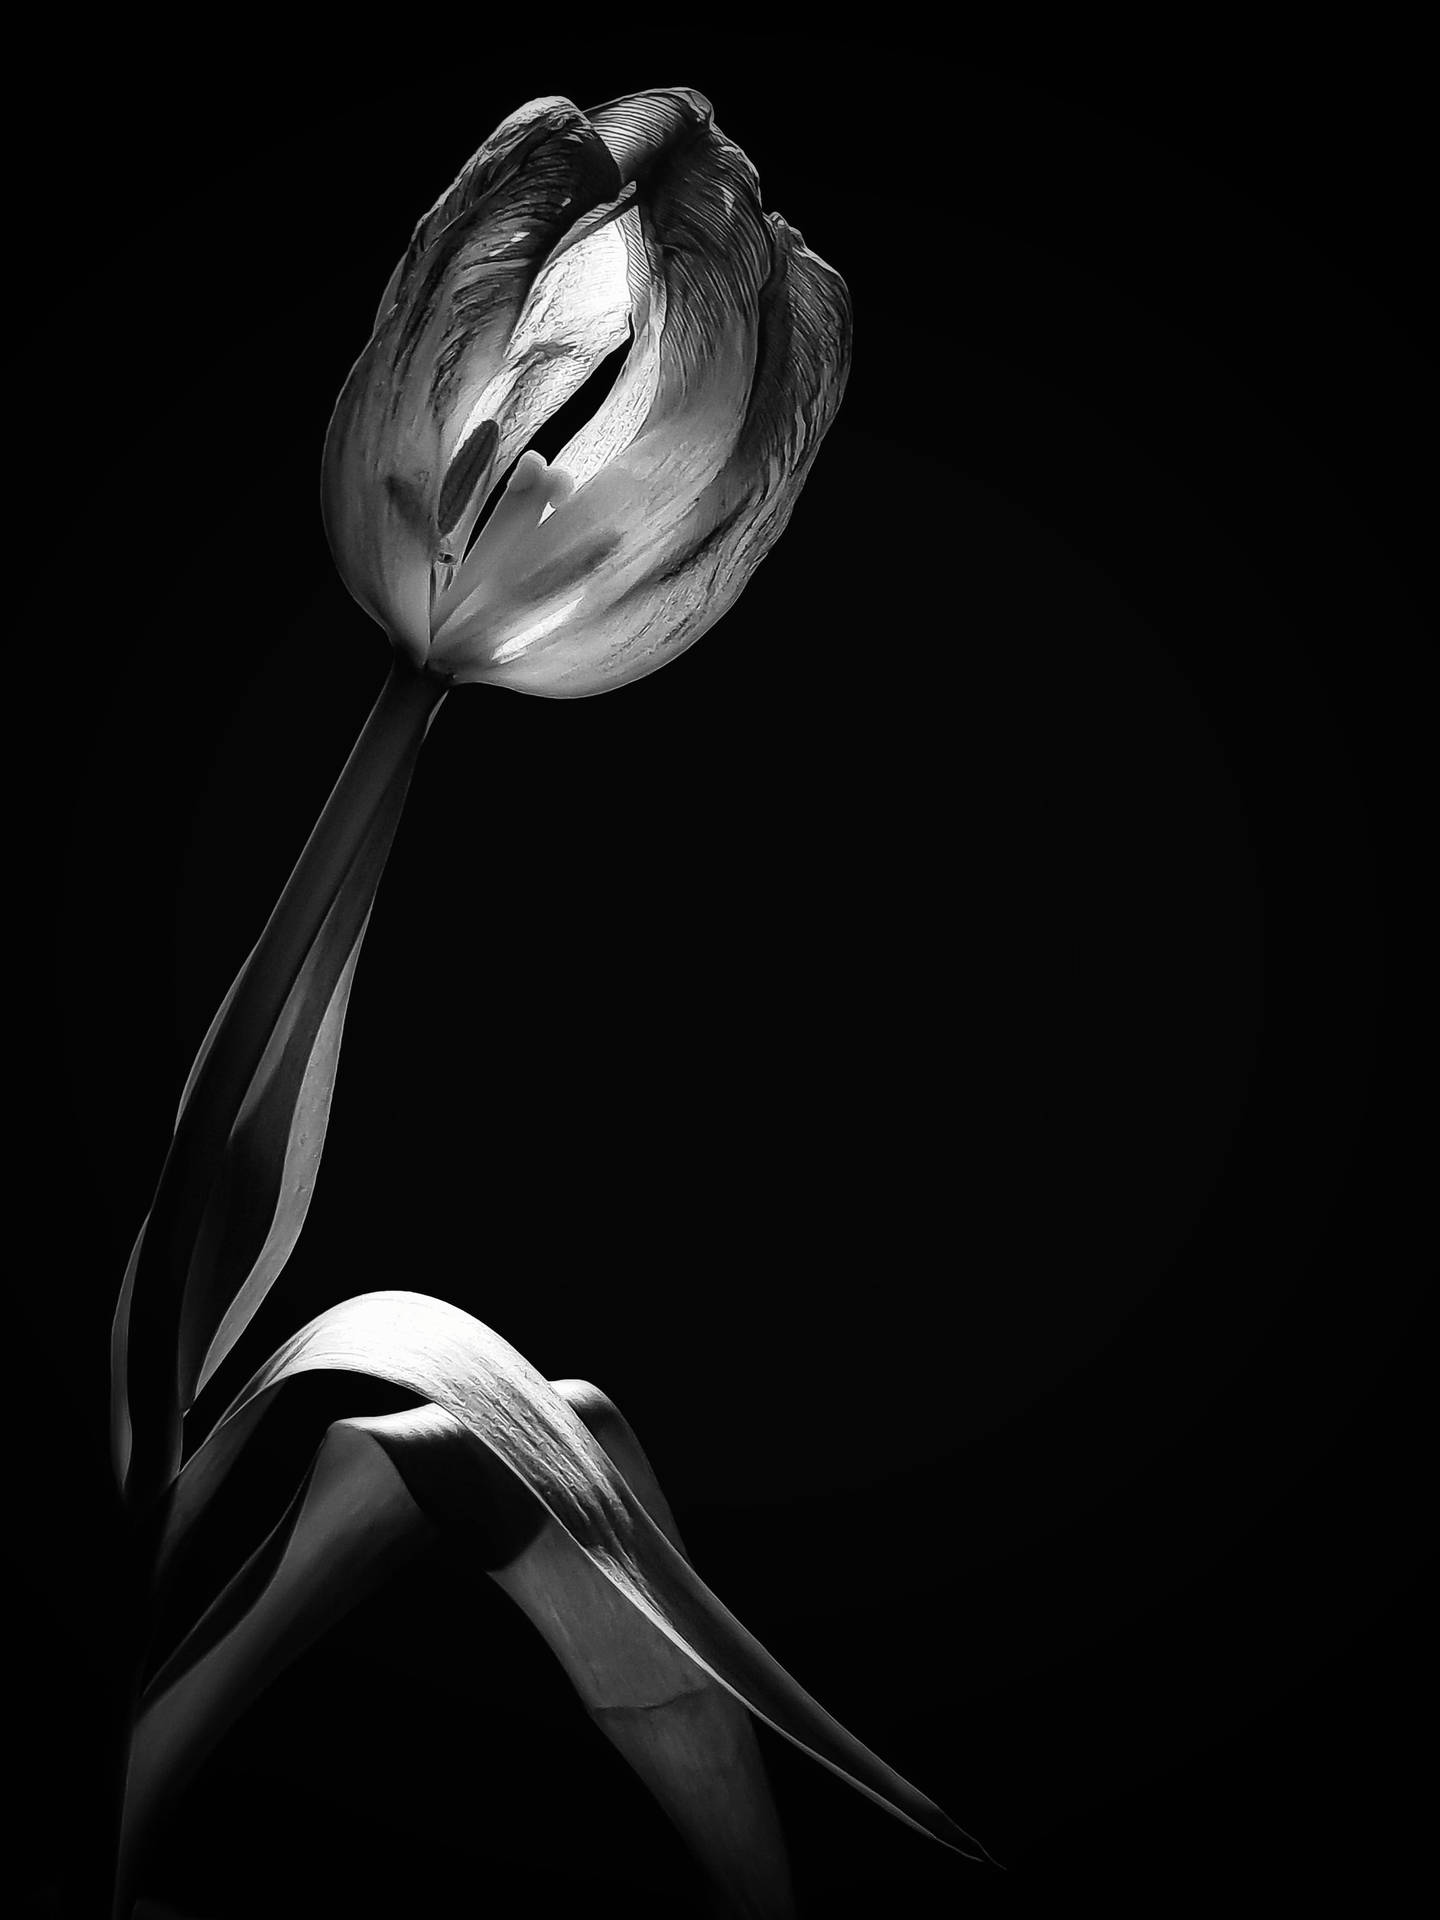 Black And White Flower Closed